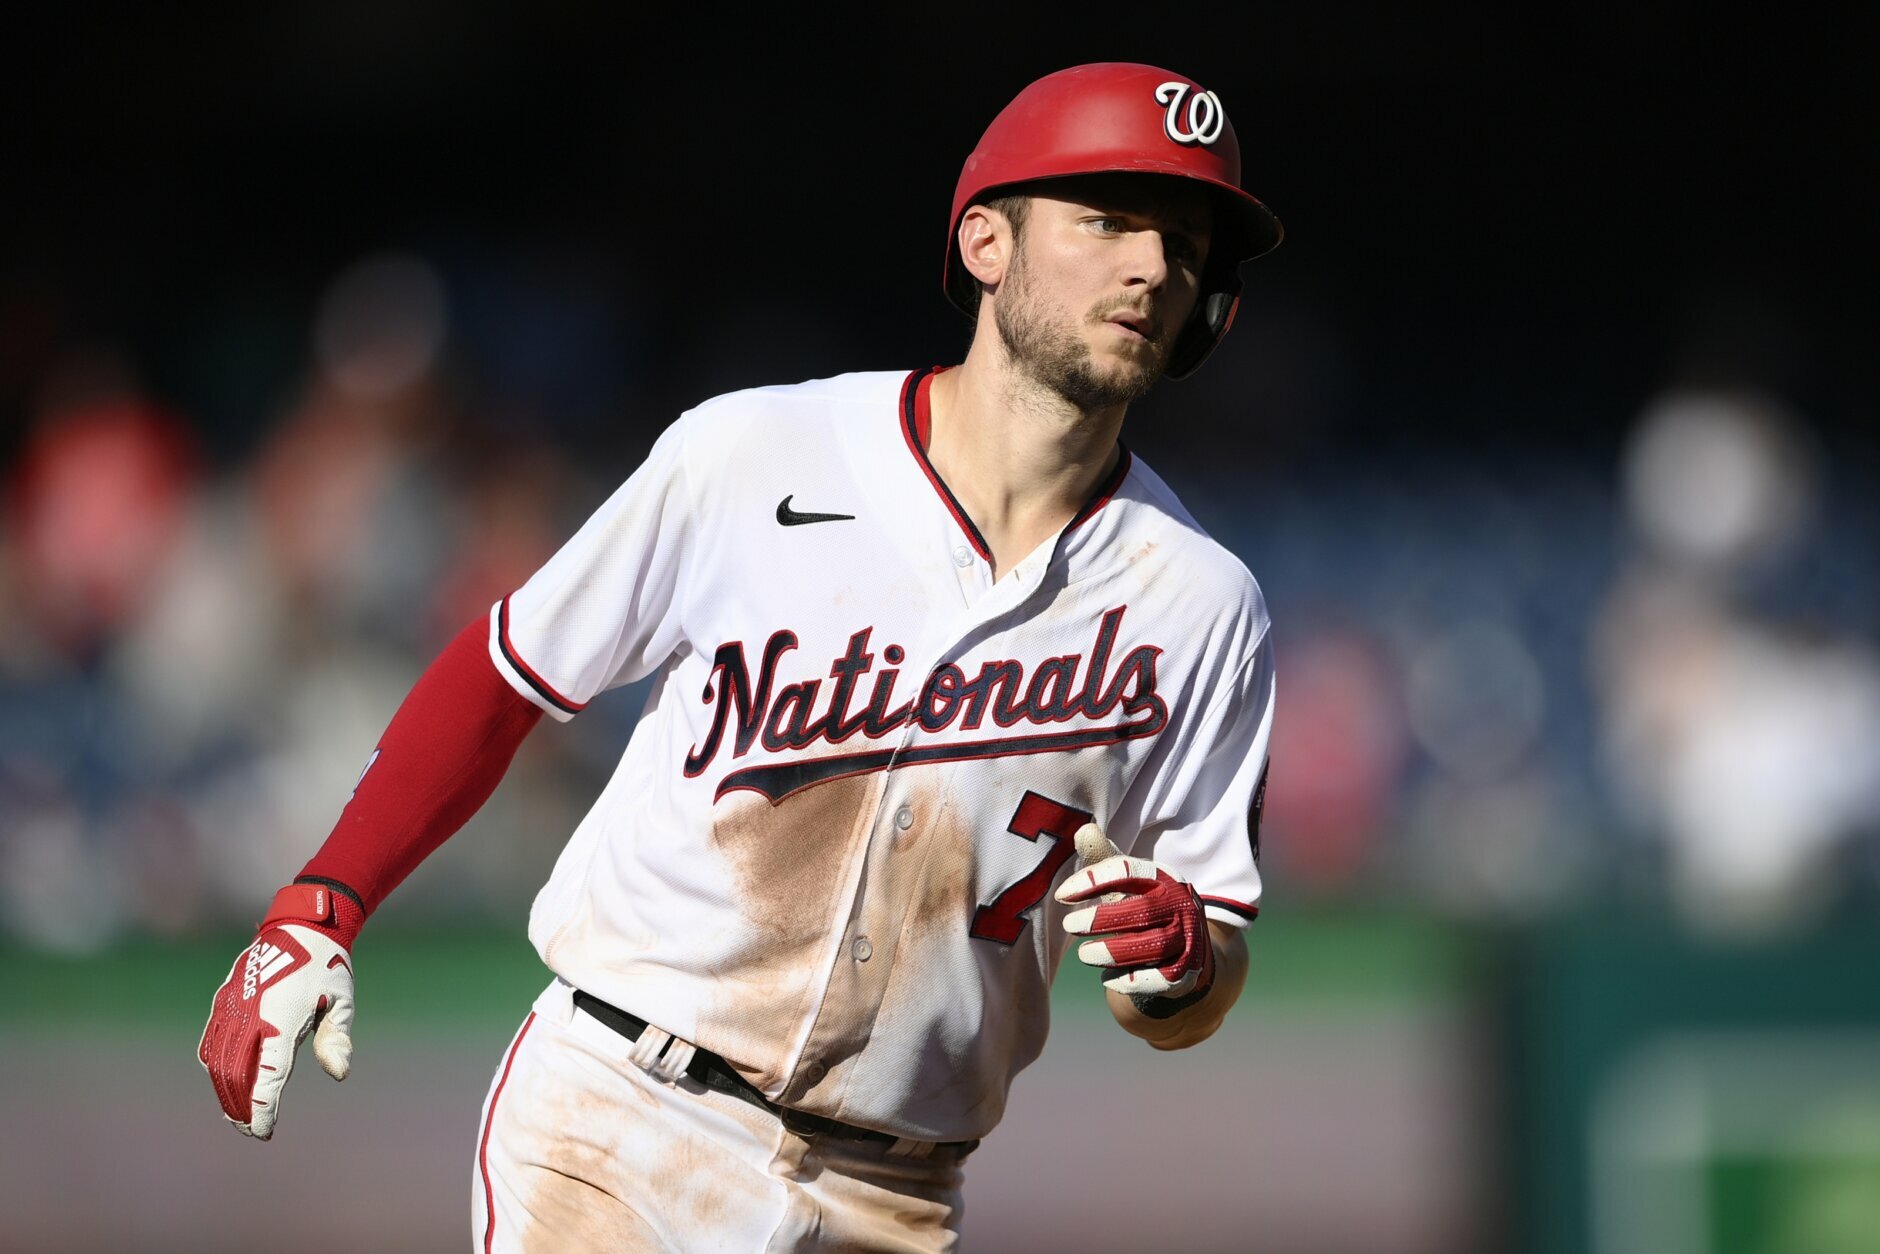 Washington Nationals' Trea Turner rounds the bases on his home run during the fourth inning of a baseball game against the Tampa Bay Rays, Wednesday, June 30, 2021, in Washington. (AP Photo/Nick Wass)